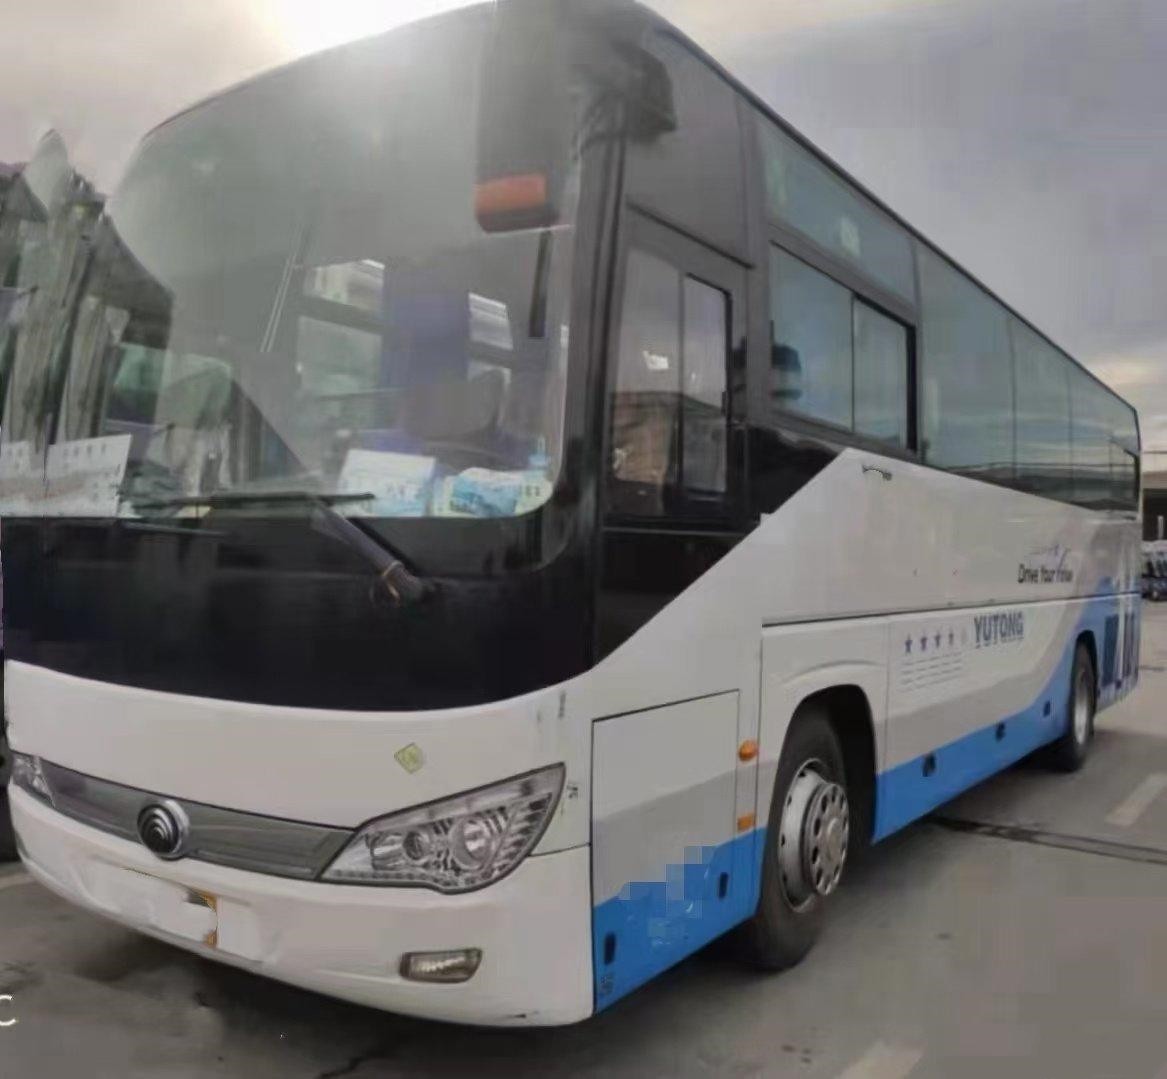 Yutong Second Hand Urban Diesel Buses Public City Passenger Buses Used Tour Sightseeing Coach Buses